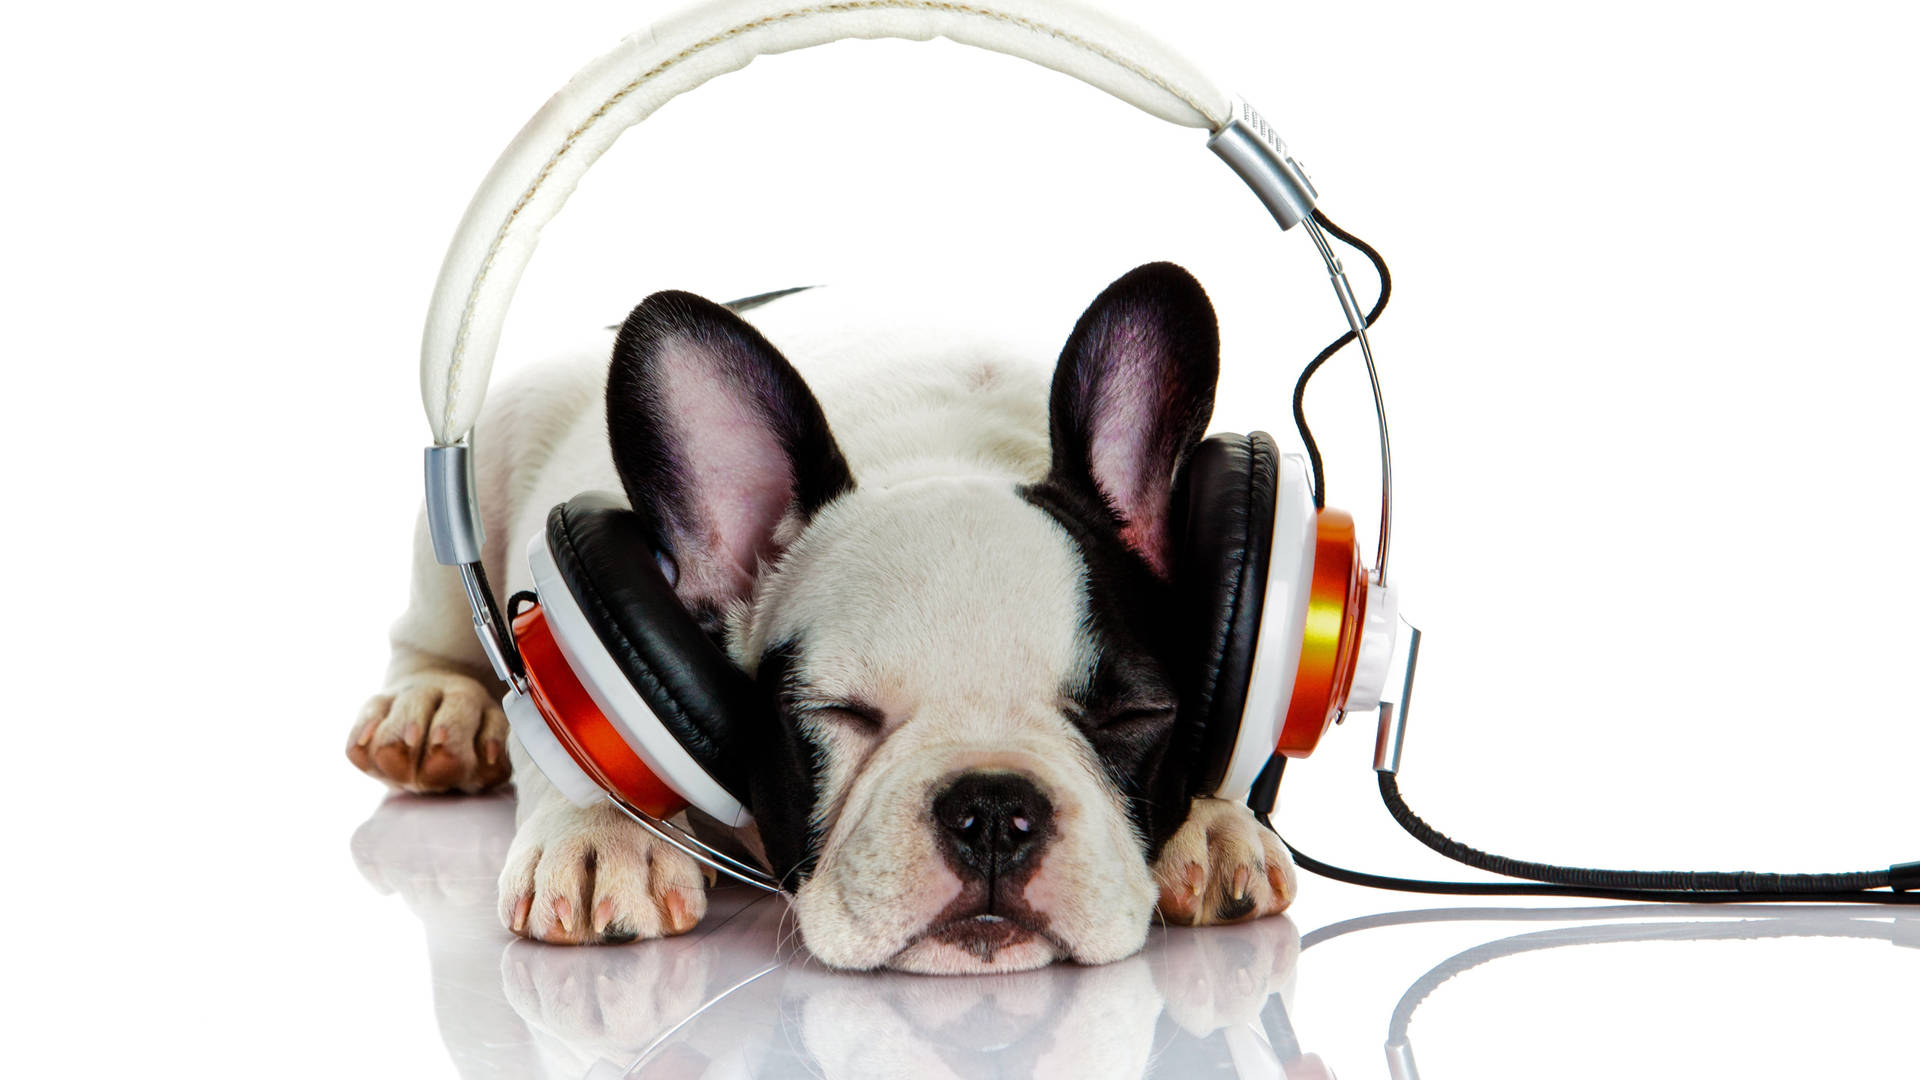 Whatsapp Puppy With Headset Wallpaper